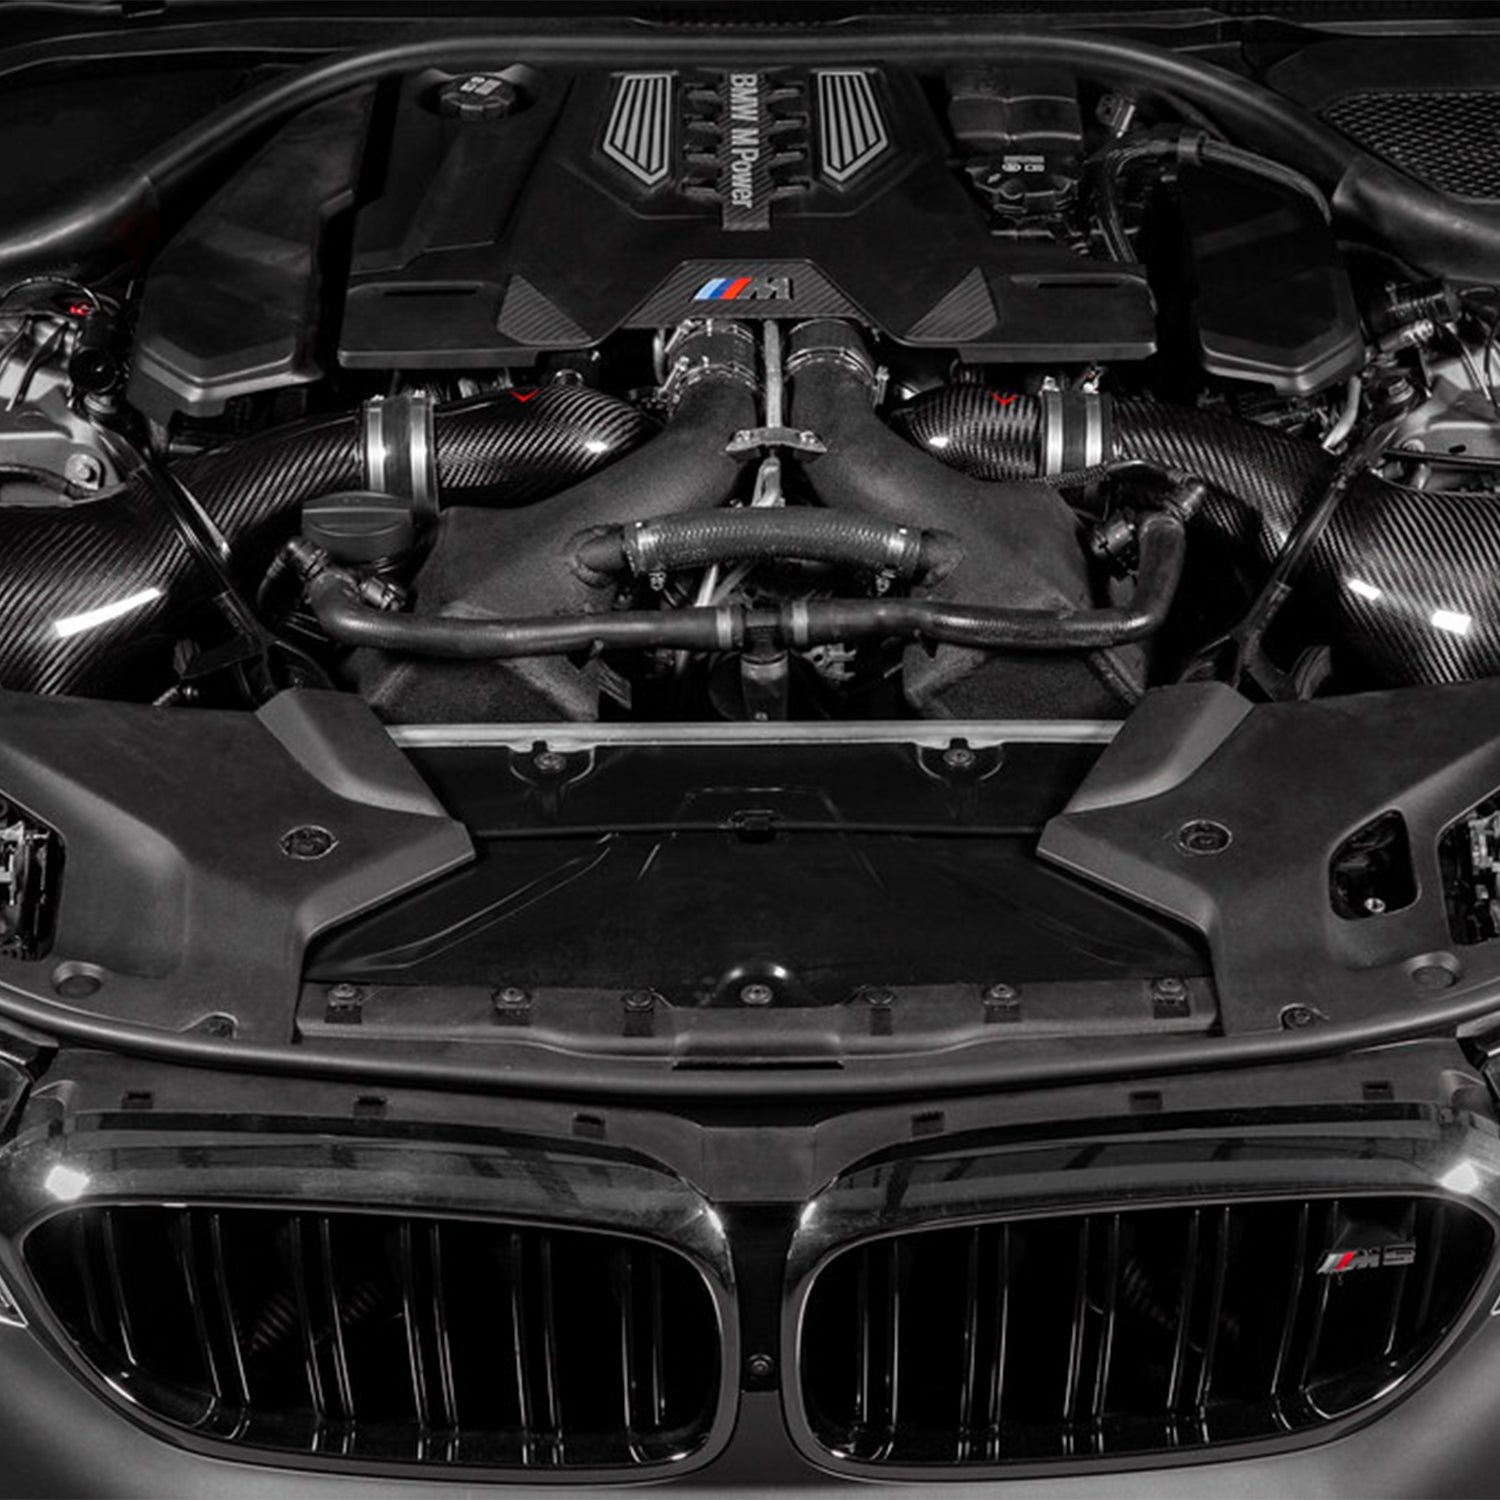 Modified BMW F90 M5 With Eventuri Inlet Pipes